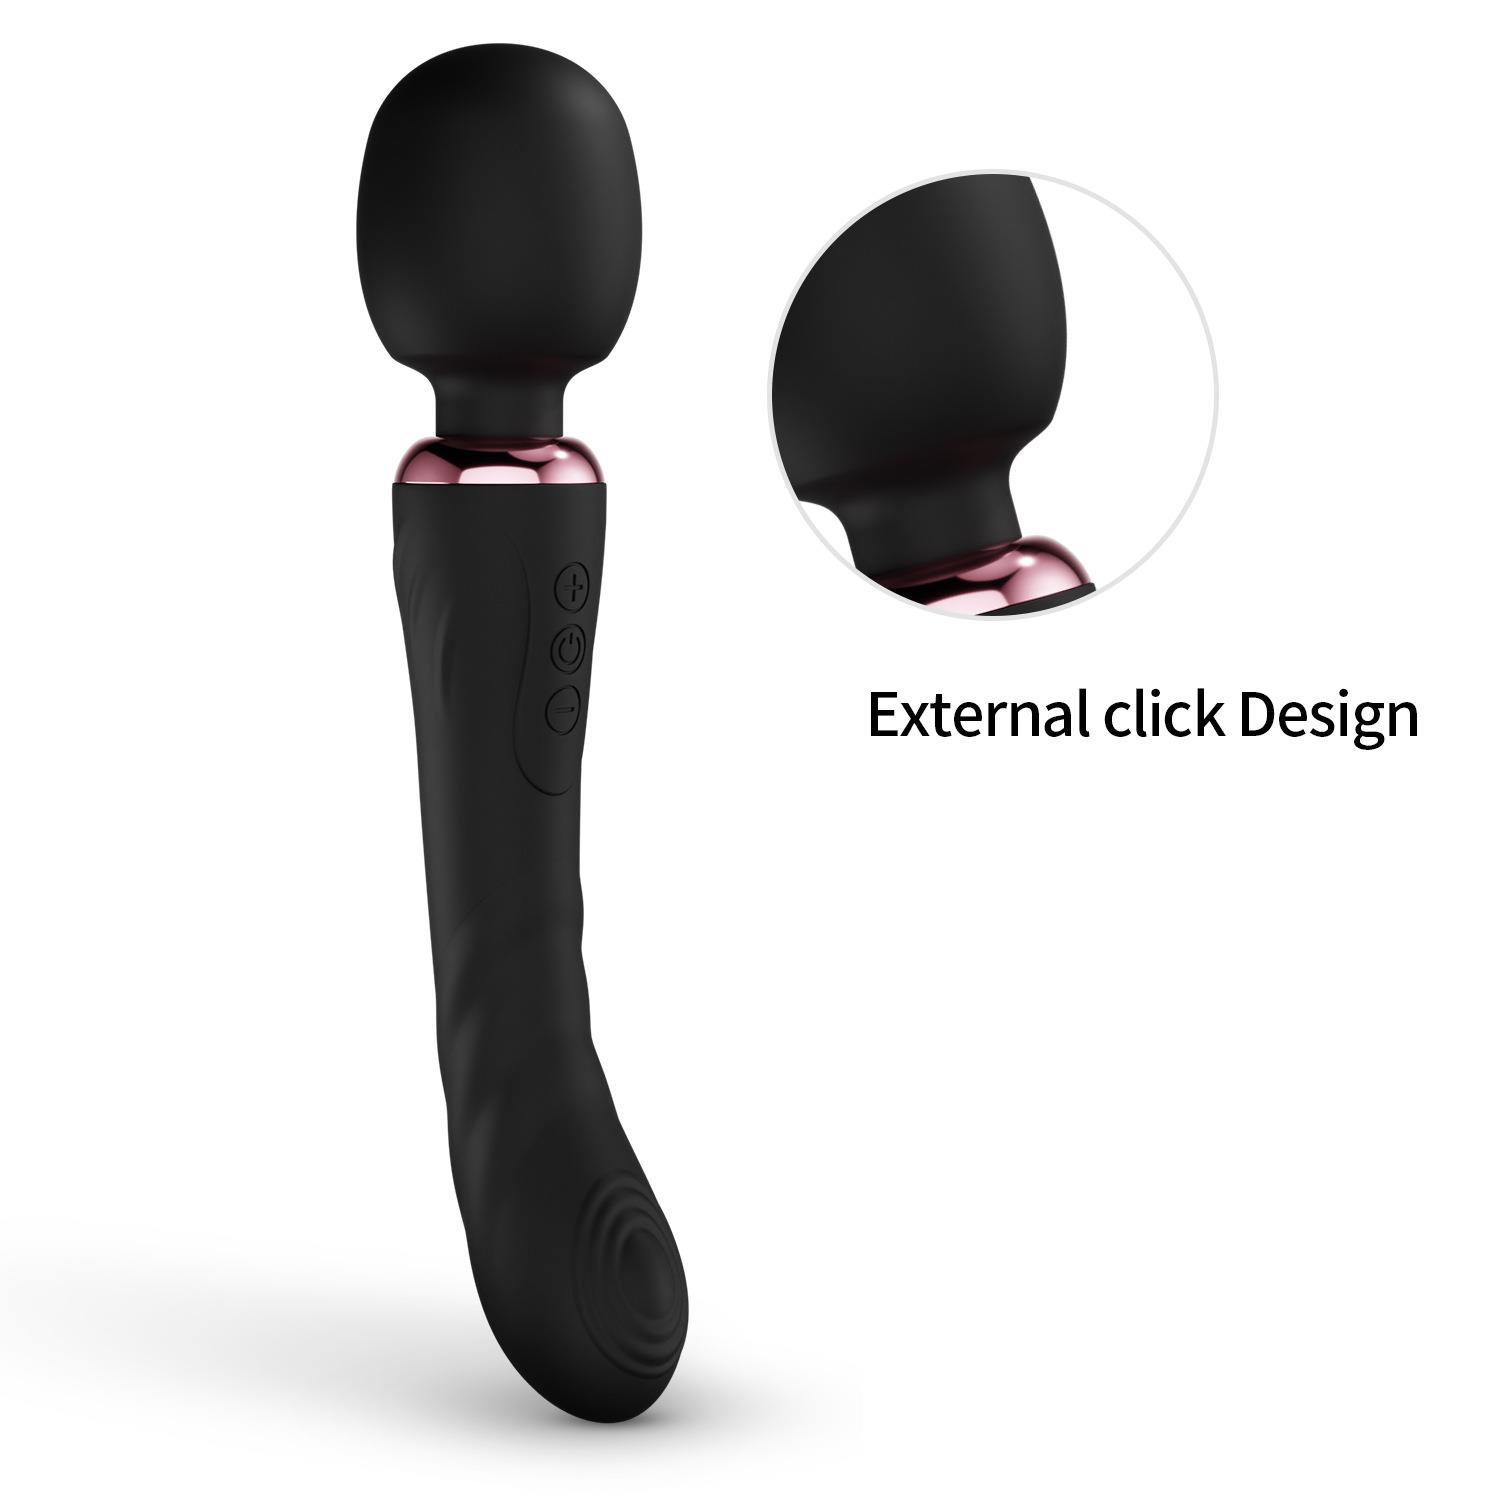 BestGSpot Wellness Massage Stick - Electric Dildo for Women with 20 Vibration Modes and Heating